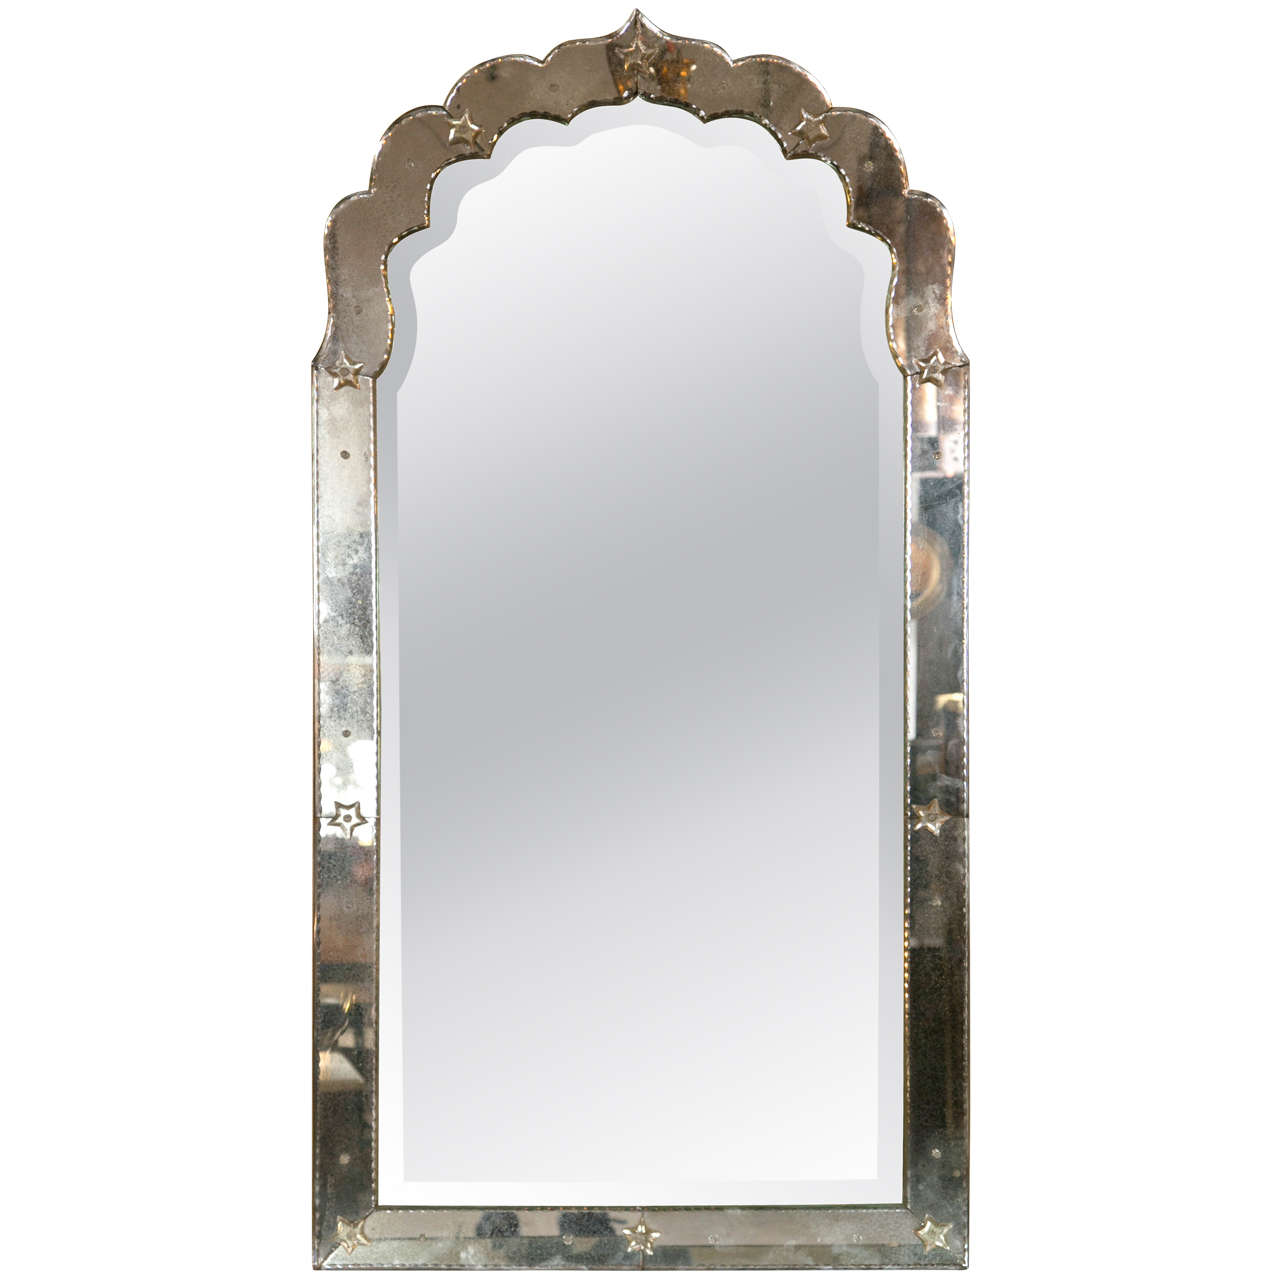 Absolutely stunning antiqued Hollywood Regency Venetian Doris Duke style pair of mirrors. The Fine beveled glass center panel framed in a ten panel outer distressed mirror. The backs of wood and heavy metal supports for hanging. Can buy one or the